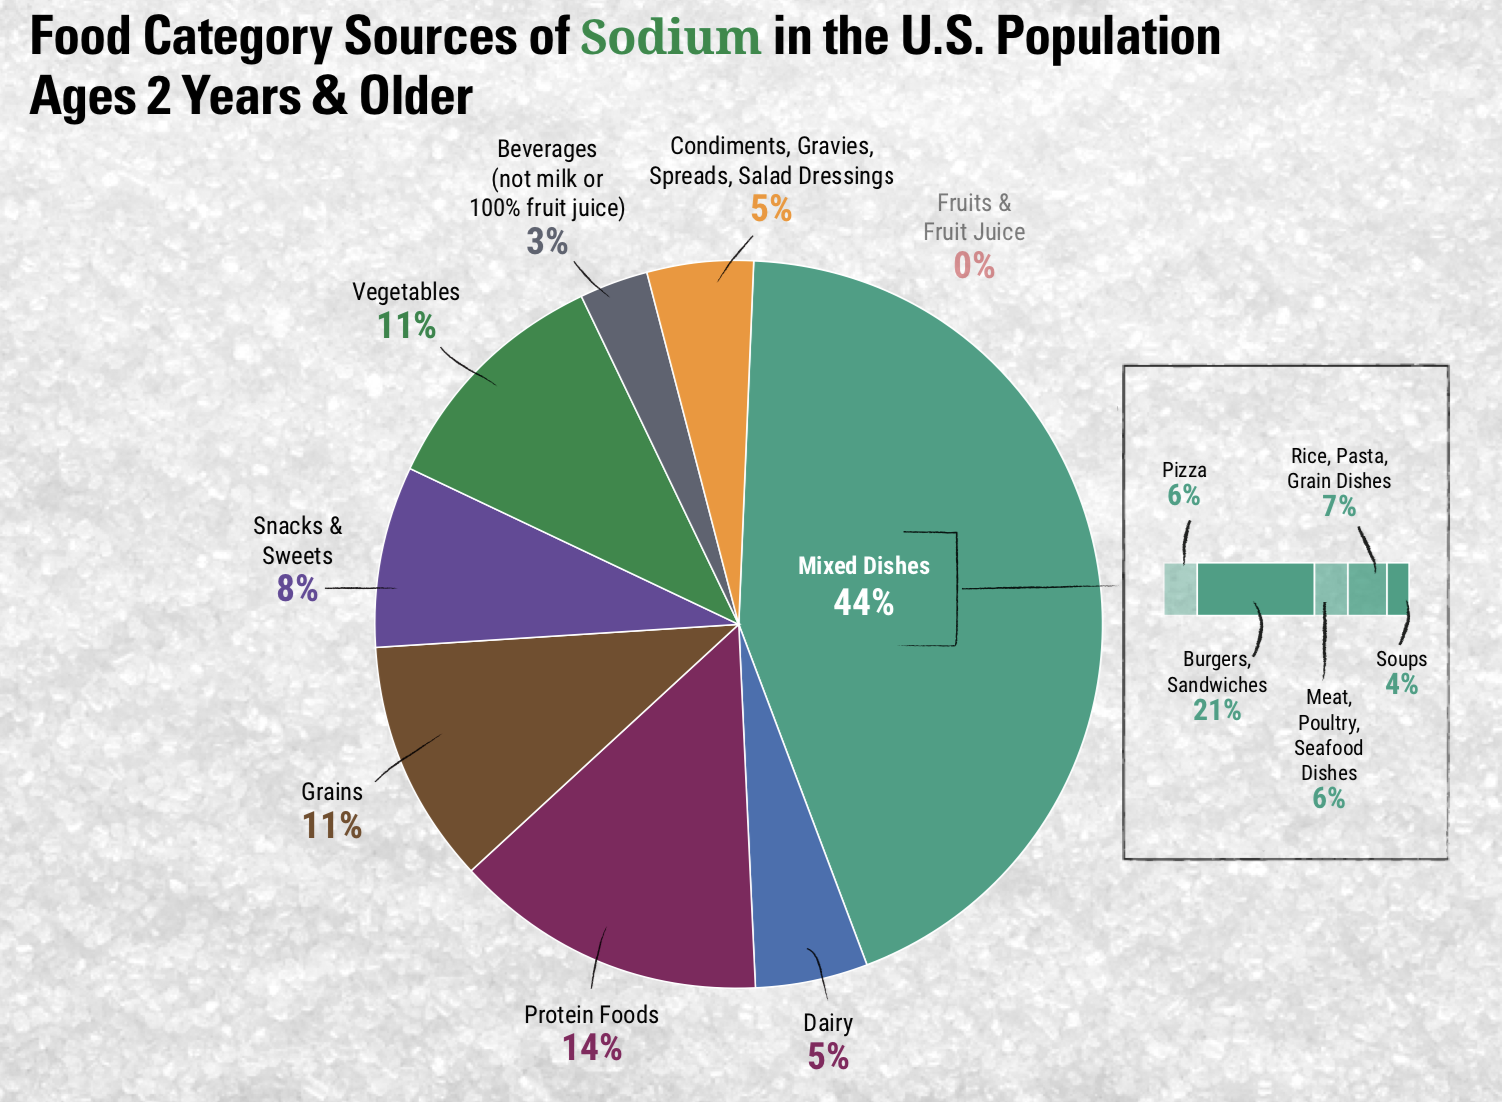 This image shows "Food Category Sources of Sodium in the U.S. Population Ages 2 Years & Older." The majority of sodium comes from mixed dishes like pizza, burgers sandwiches, and grain dishes (44%), followed by protein foods (14%), grains (11%), vegetables (11%), snacks and sweets (8%), condiments (5%), dairy (5%), and beverages, not including milk or 100% fruit juice (3%).